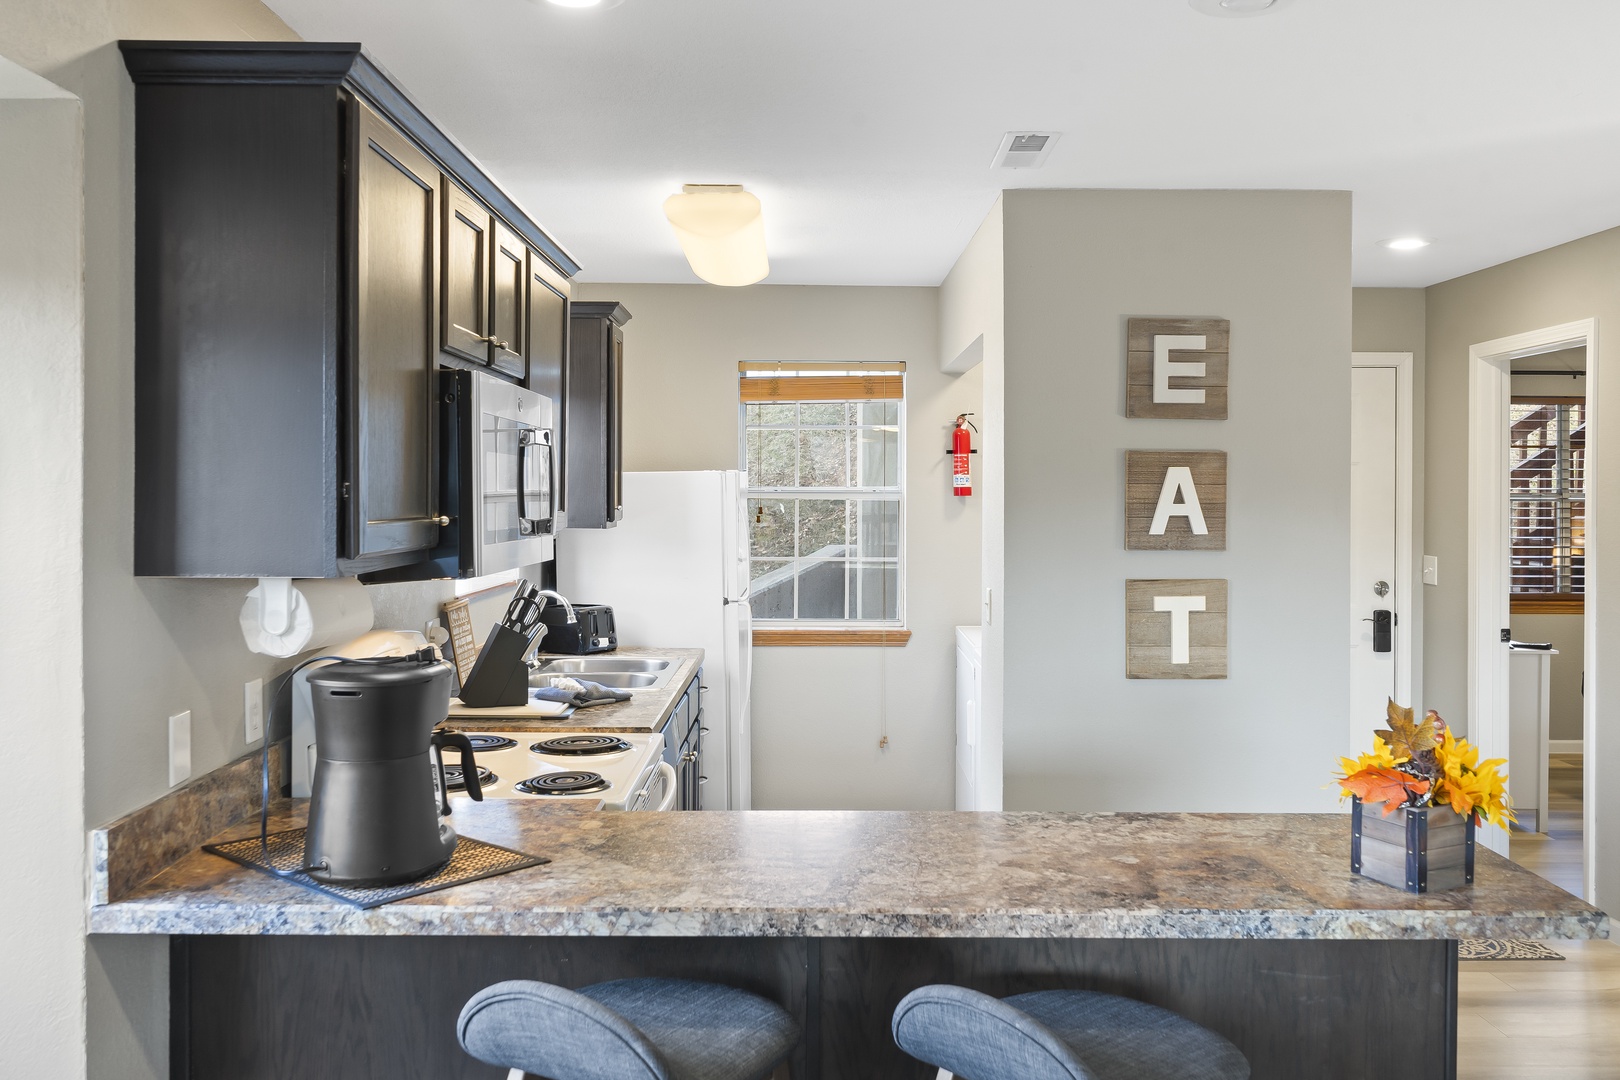 The cheerful kitchen offers ample space & all the comforts of home